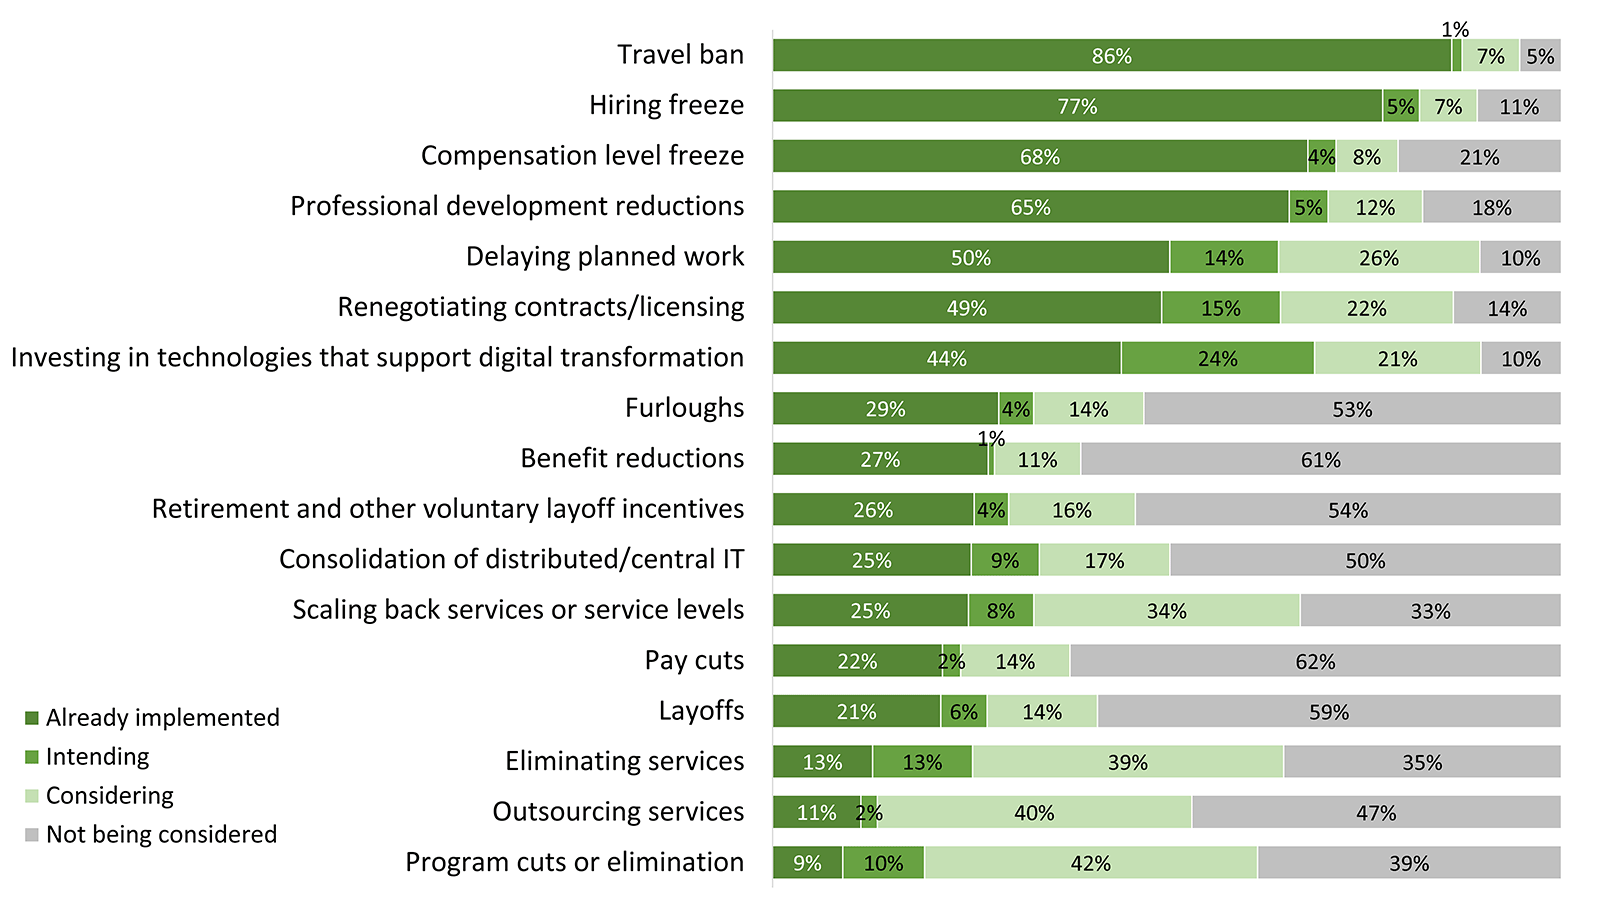 stacked bar graph showing the percentage of respondents who indicated that they were implementing or considering these tactics. (A)lready implemented, (I)ntending, (C)onsidering, (N)ot being considered.
Travel ban A 86%; I 1%; C 7%; N 5%.
Hiring freeze A 77%; I 5%; C 7%; N 11%.
Compensation level freeze A 68%; I 4%; C 8%; N 21%.
Professional development reductions A 65%; I 5%; C 12%; N 18%.
Delaying planned work A 50%; I 14%; C 26%; N 10%.
Renegotiating contracts/licensing A 49%; I 15%; C 22%; N 14%.
Investing in technologies that support digital transformation A 44%; I 24%; C 21%; N 10%.
Furloughs A 29%; I 4%; C 14%; N 53%.
Benefit reductions A 27%; I 1%; C 11%; N 61%.
Retirement and other voluntary layoff incentives A 26%; I 4%; C 16%; N 54%.
Consolidation of distributed/central IT A 25%; I 9%; C 17%; N 50%.
Scaling back services or service levels A 25%; I 8%; C 34%; N 33%.
Pay cuts A 22%; I 2%; C 14%; N 62%.
Layoffs A 21%; I 6%; C 14%; N 59%.
Eliminating services A 13%; I 13%; C 39%; N 35%.
Outsourcing services A 11%; I 2%; C 40%; N 47%.
Program cuts or elimination A 9%; I 10%; C 42%; N 39%.